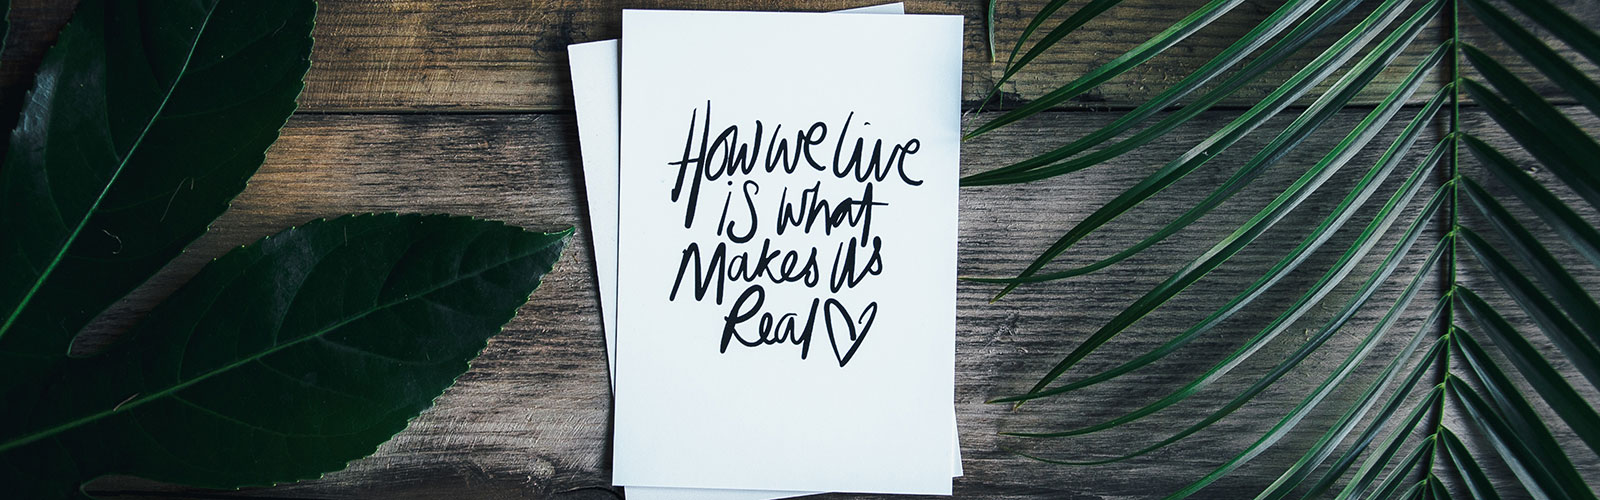 Image: Card with "How we live is what makes us real" text